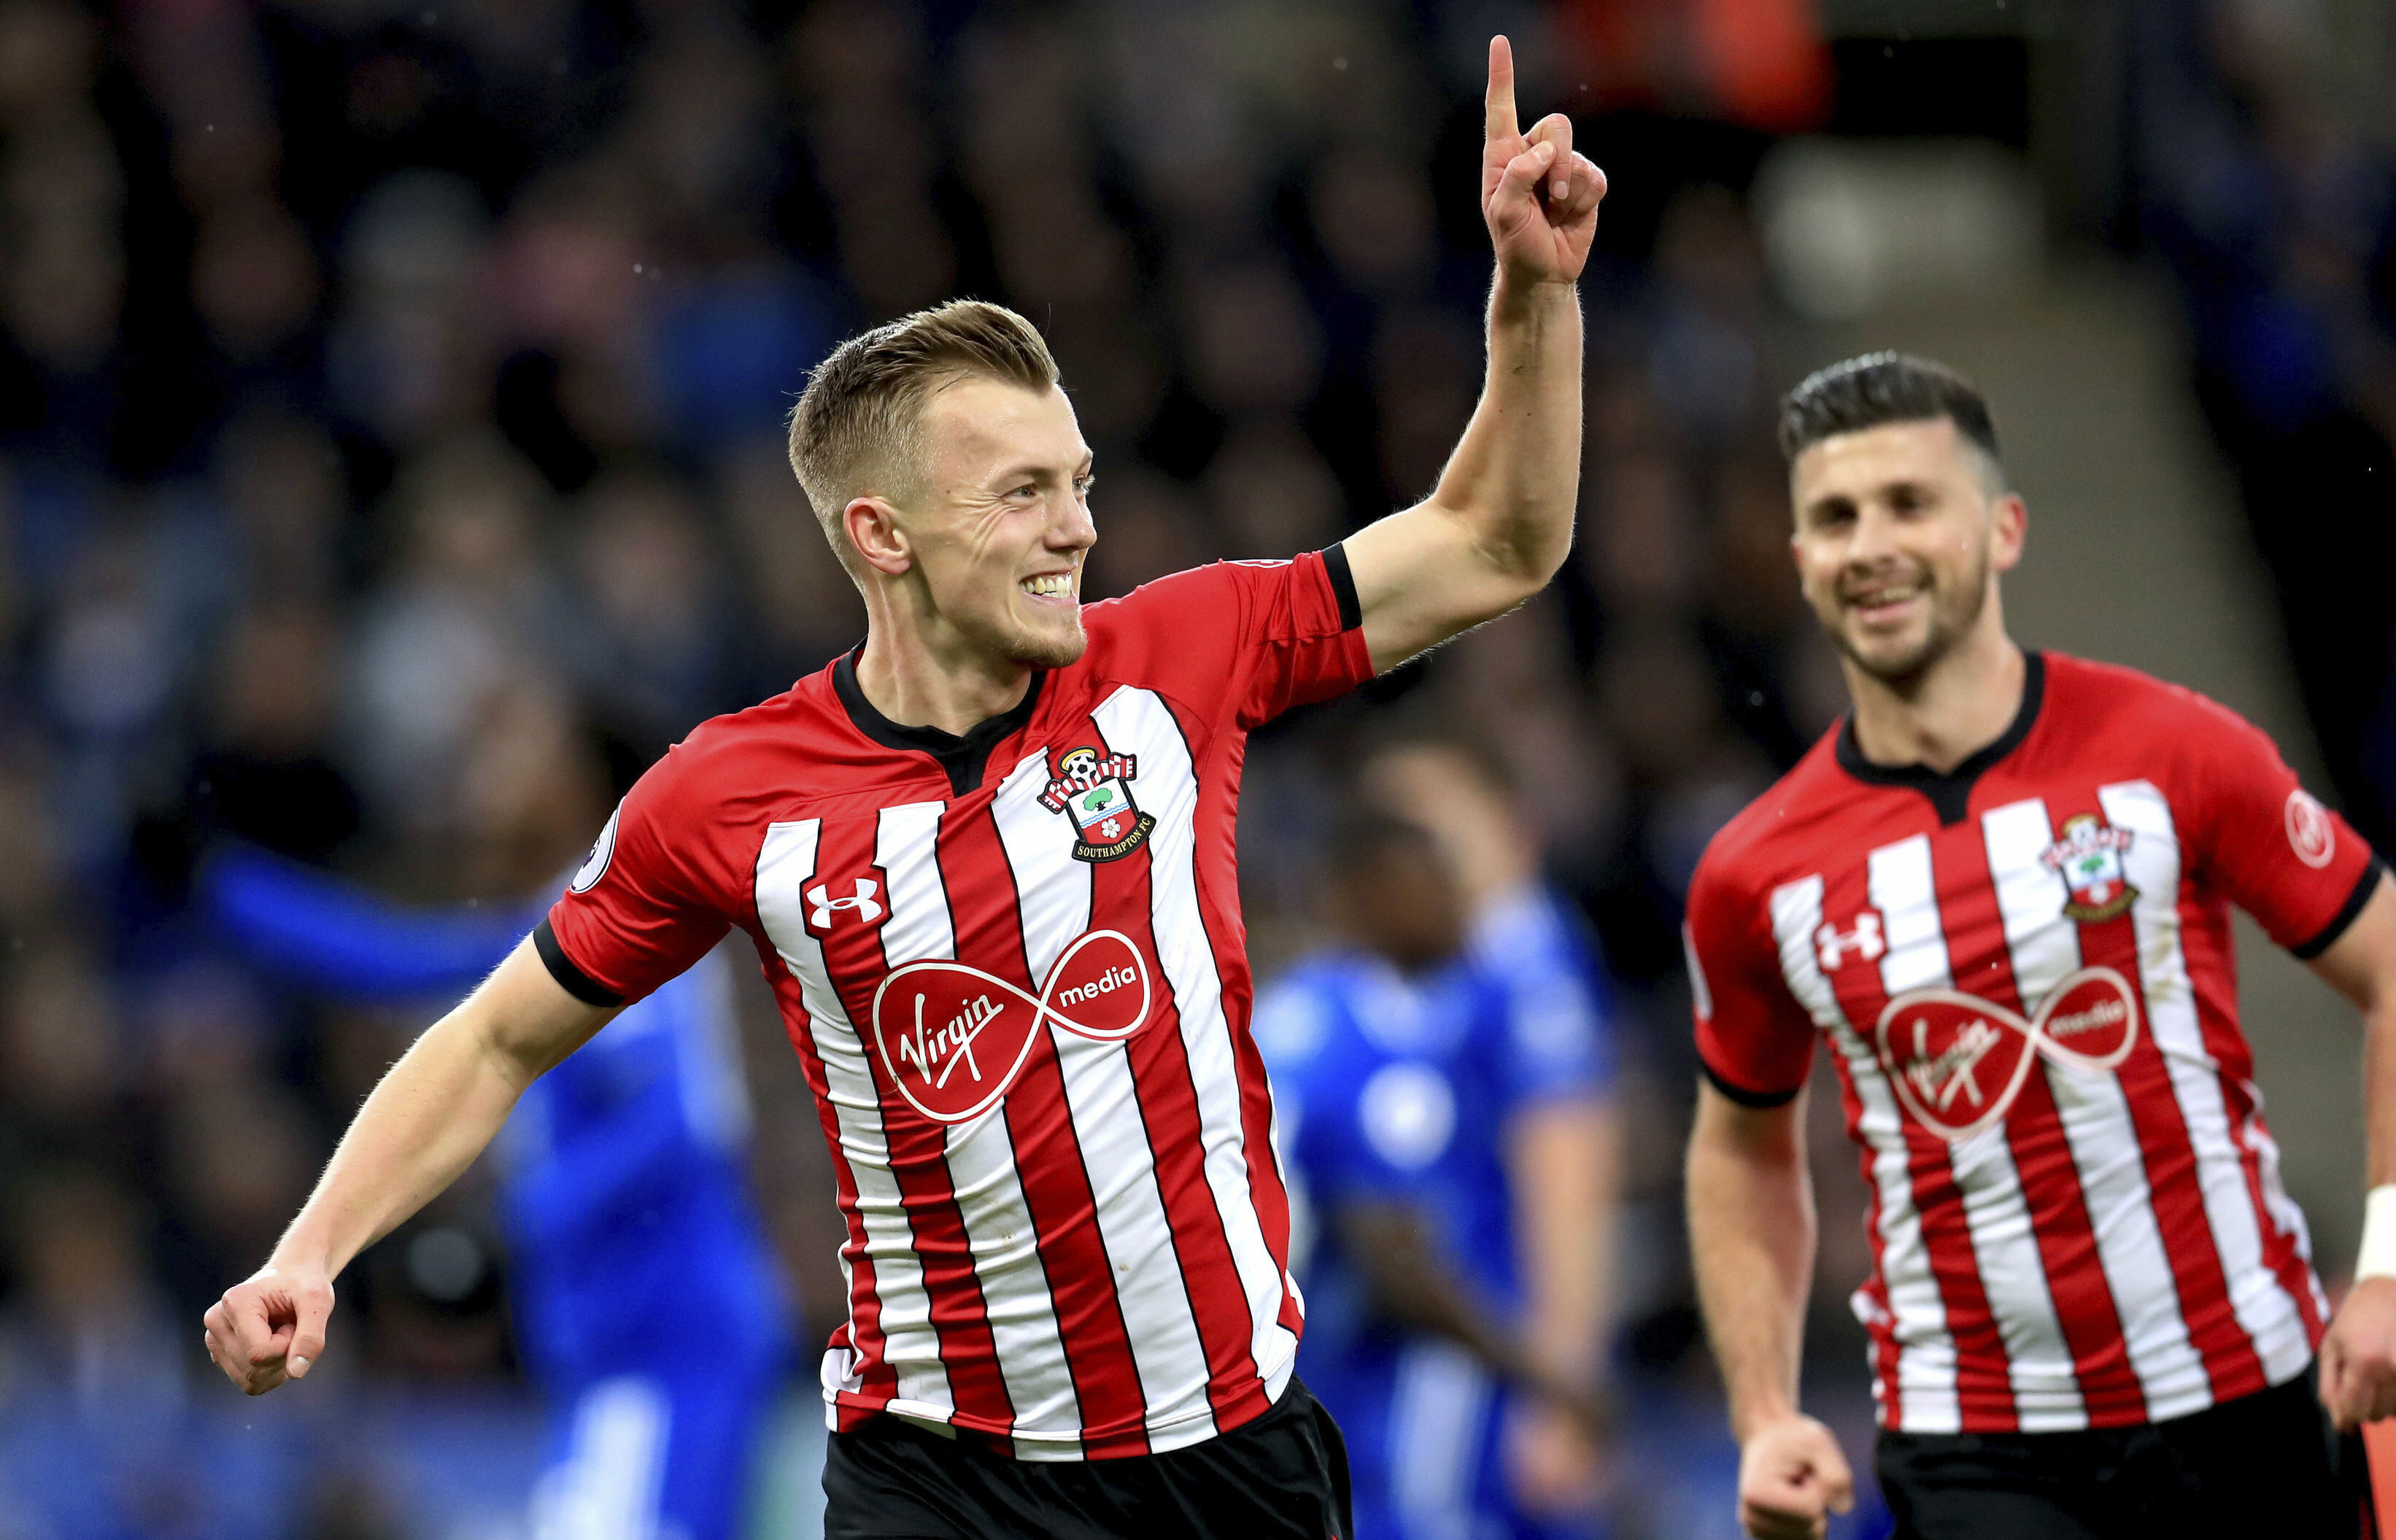 Southampton out of relegation zone with 2-1 win vs Leicester